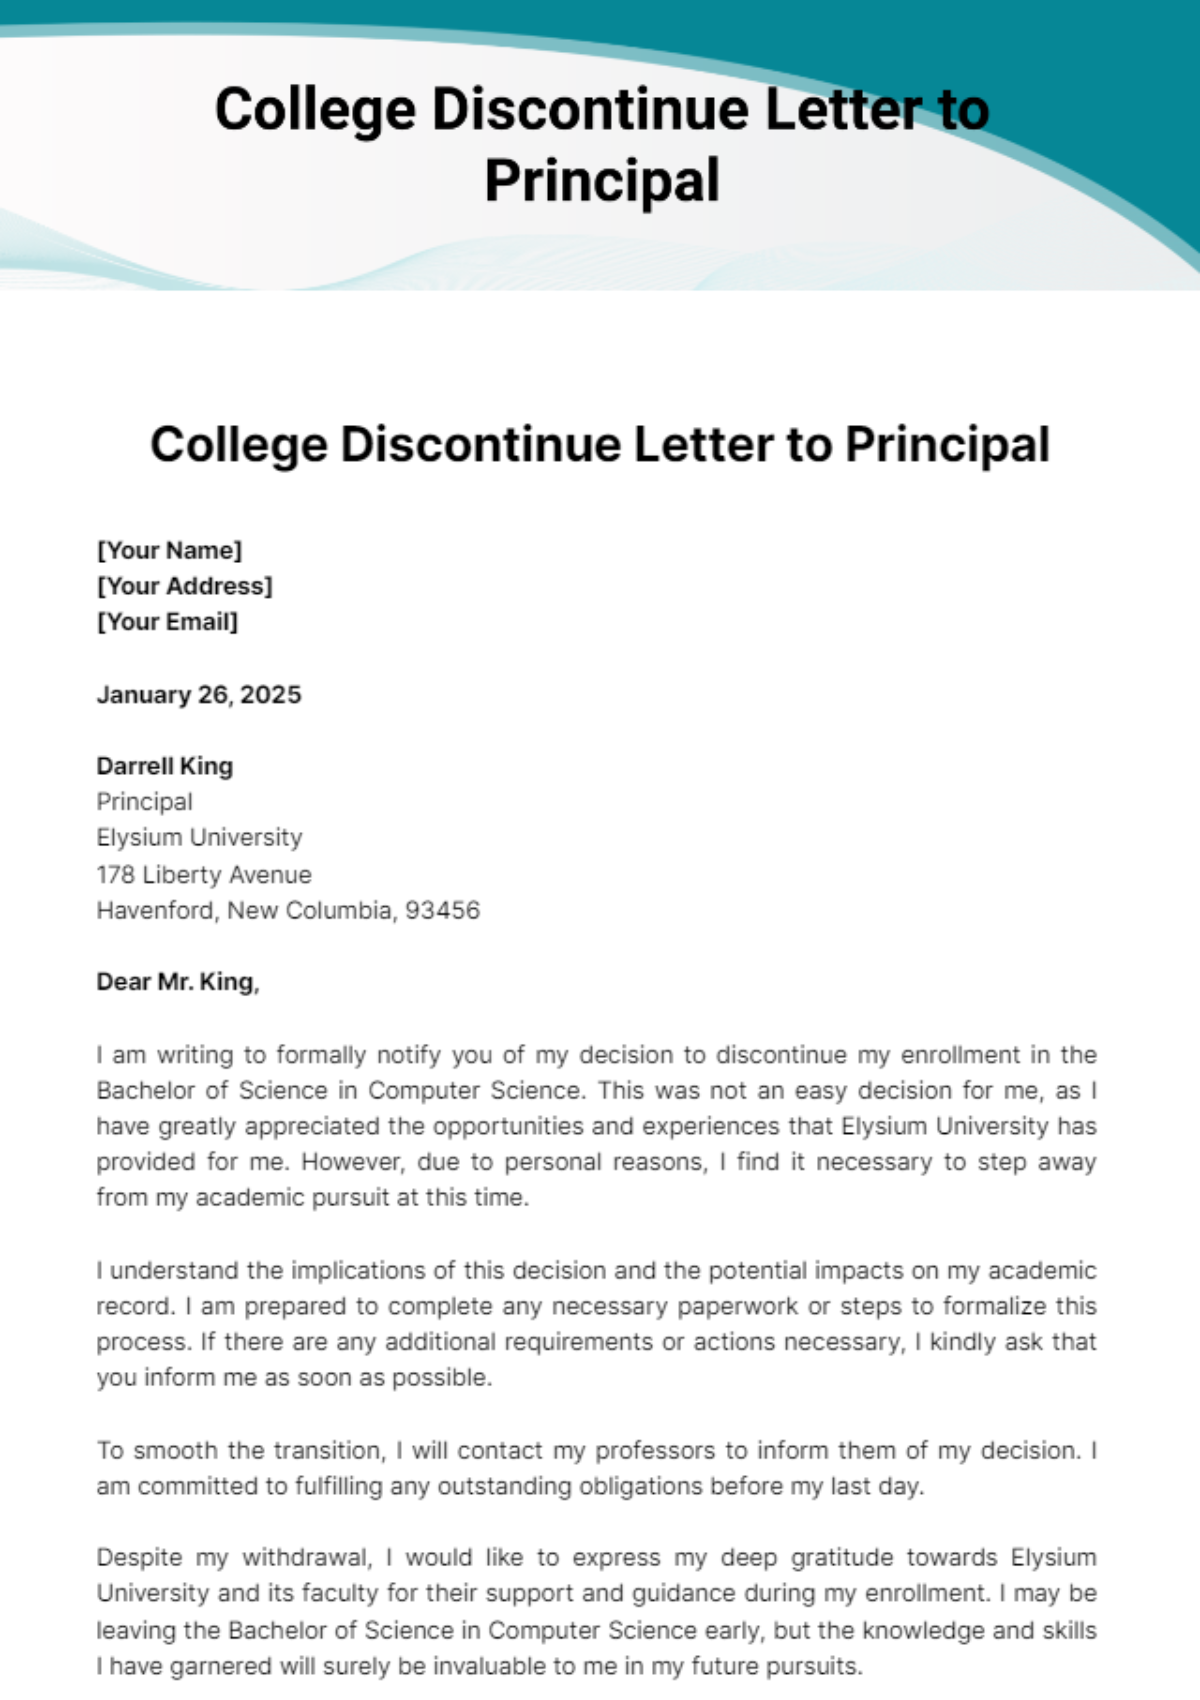 Free College Discontinue Letter to Principal Template